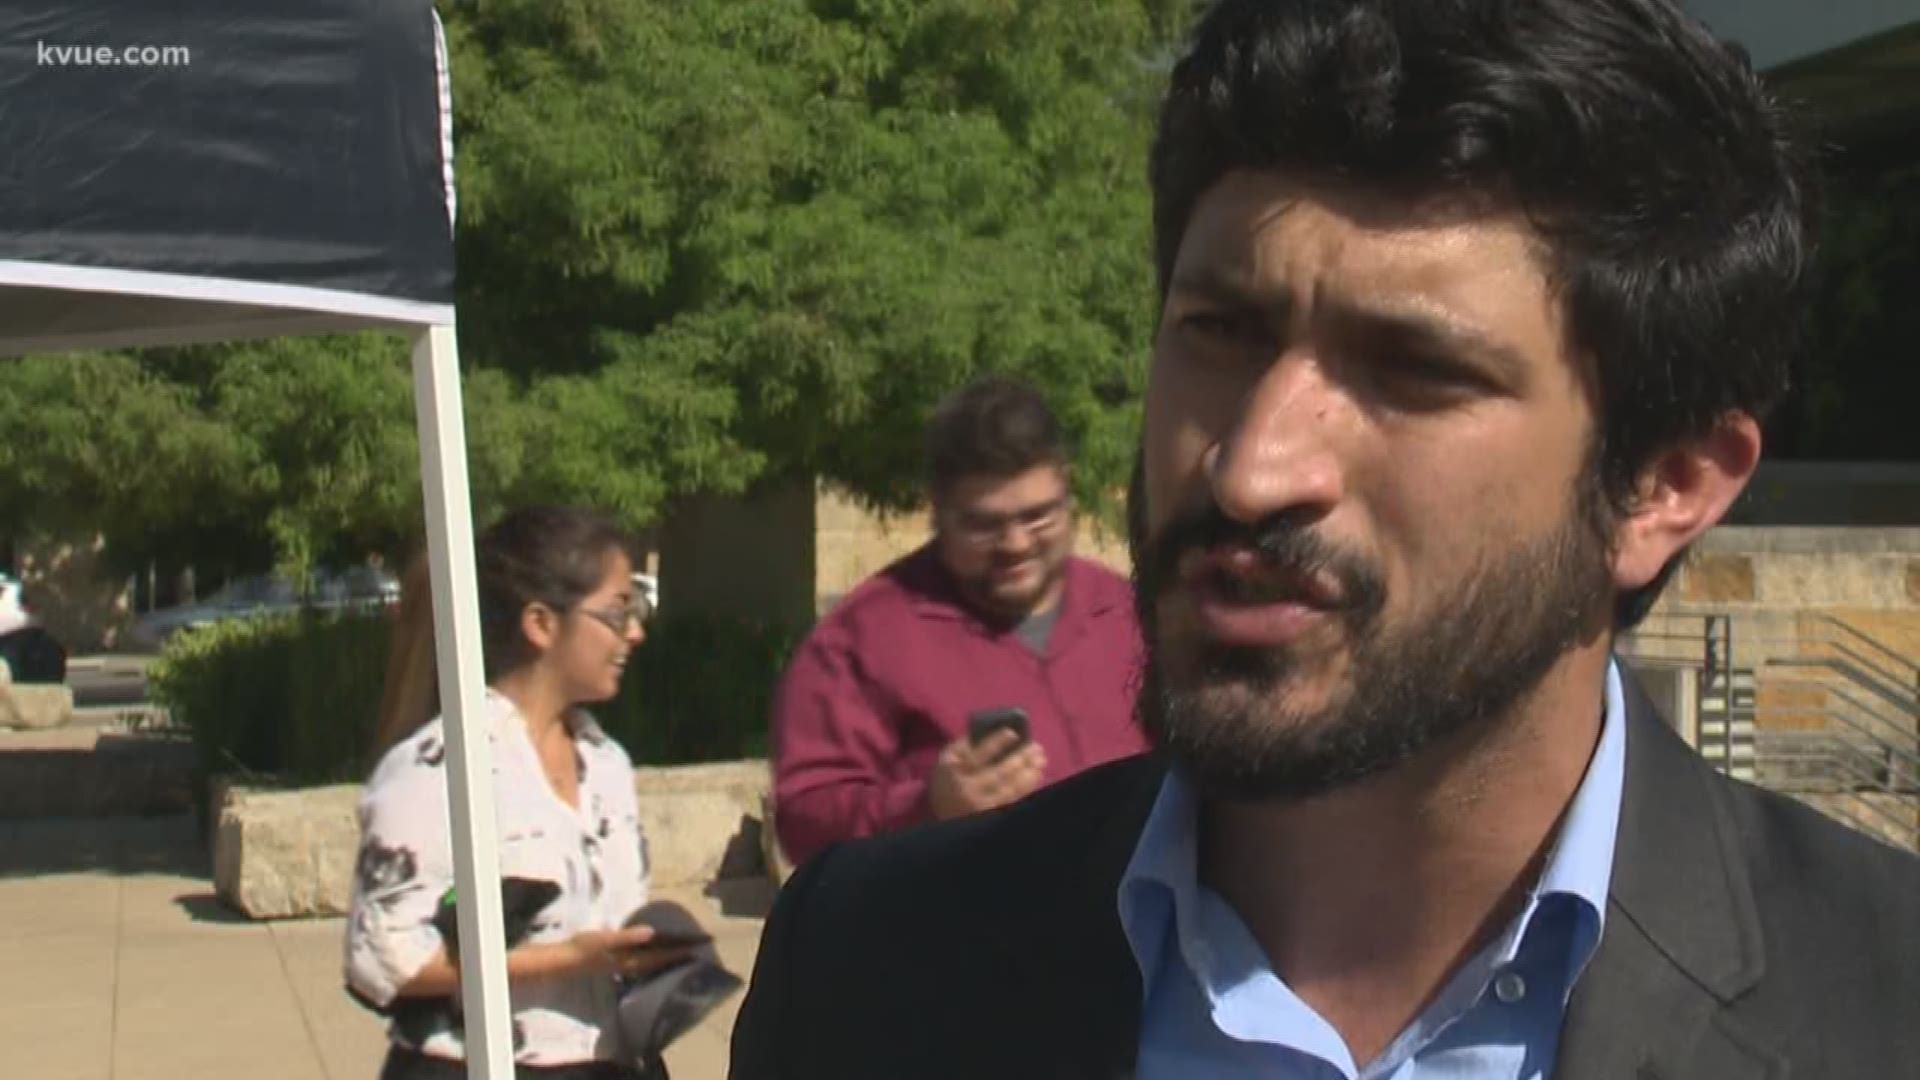 Council member Greg Casar is behind the push to reform the Austin Police Department. But he's facing criticism for his accusations against the police.